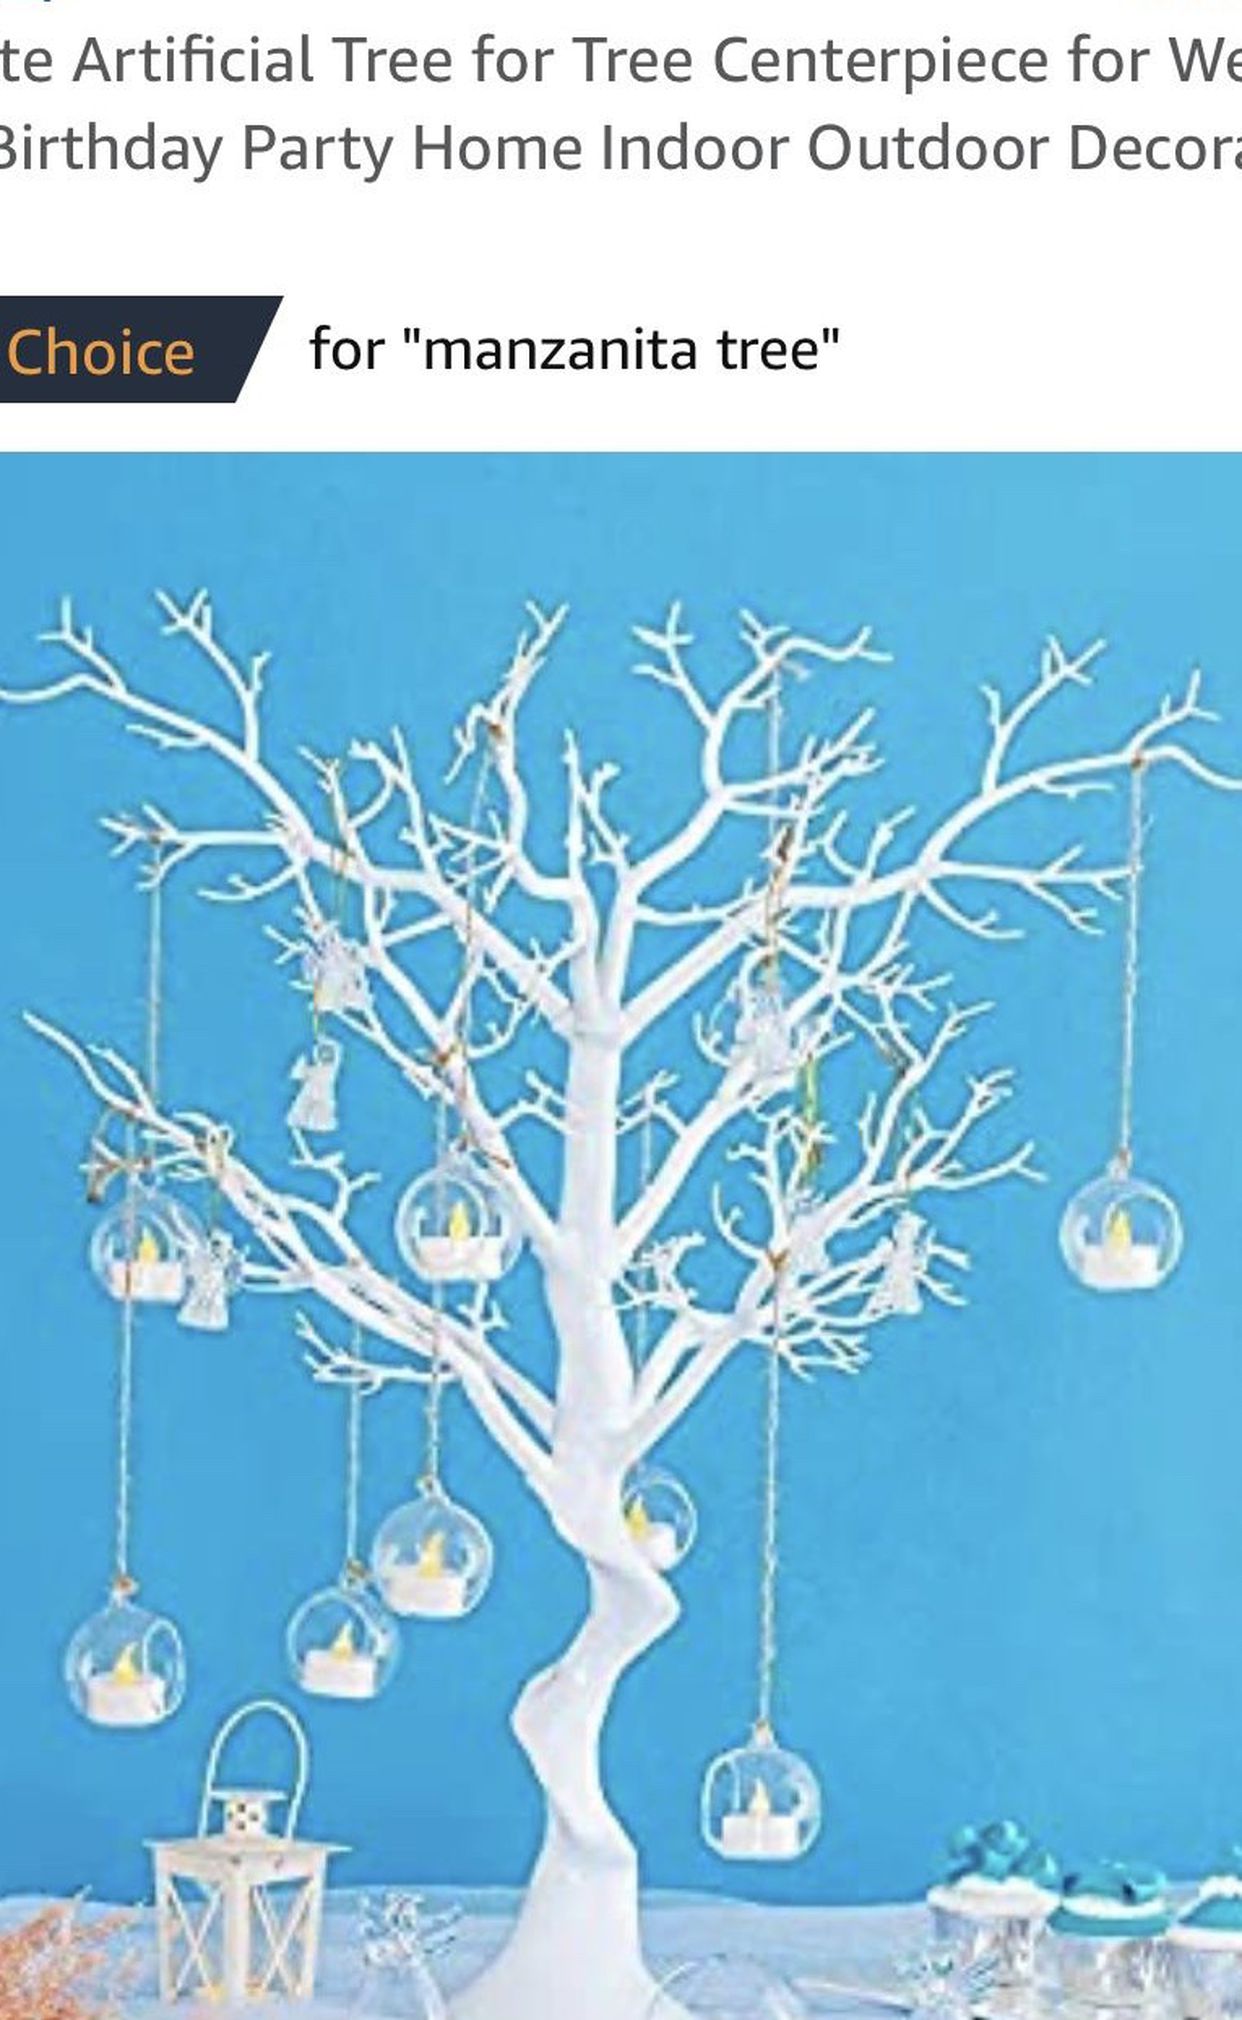 White Artificial Tree for Tree Centerpiece